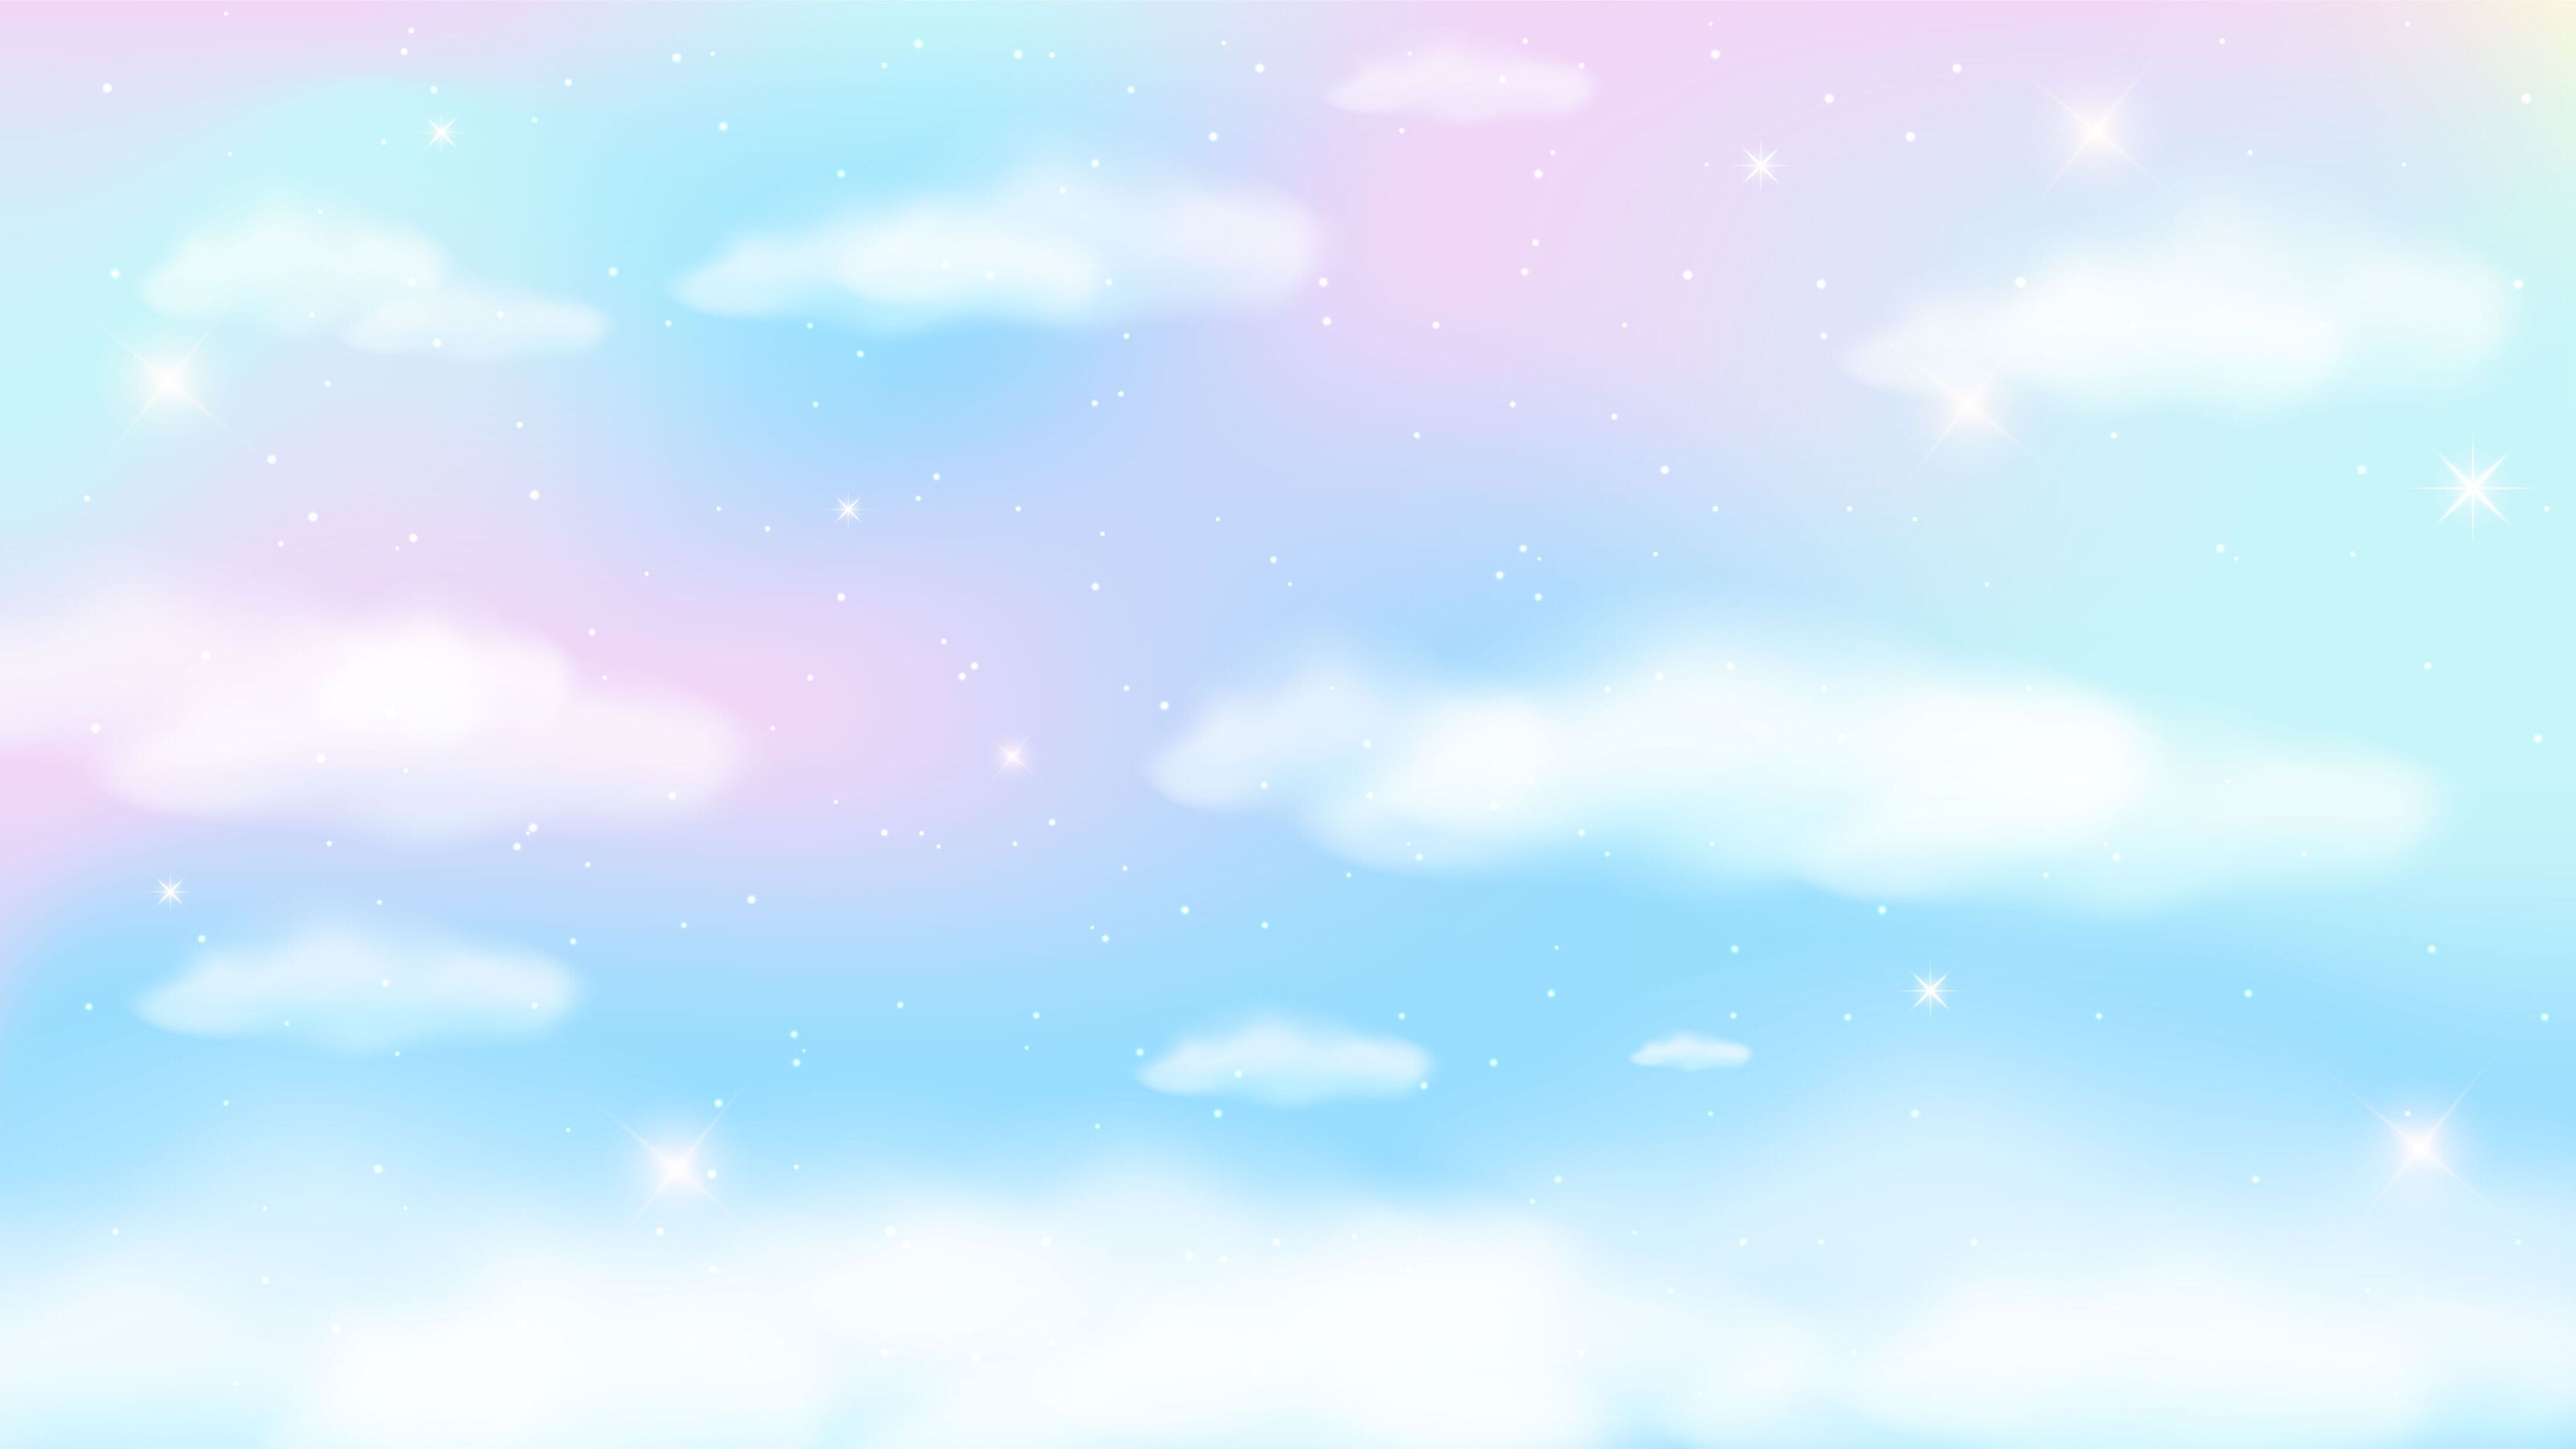 A sky with clouds and stars - Unicorn, pastel rainbow